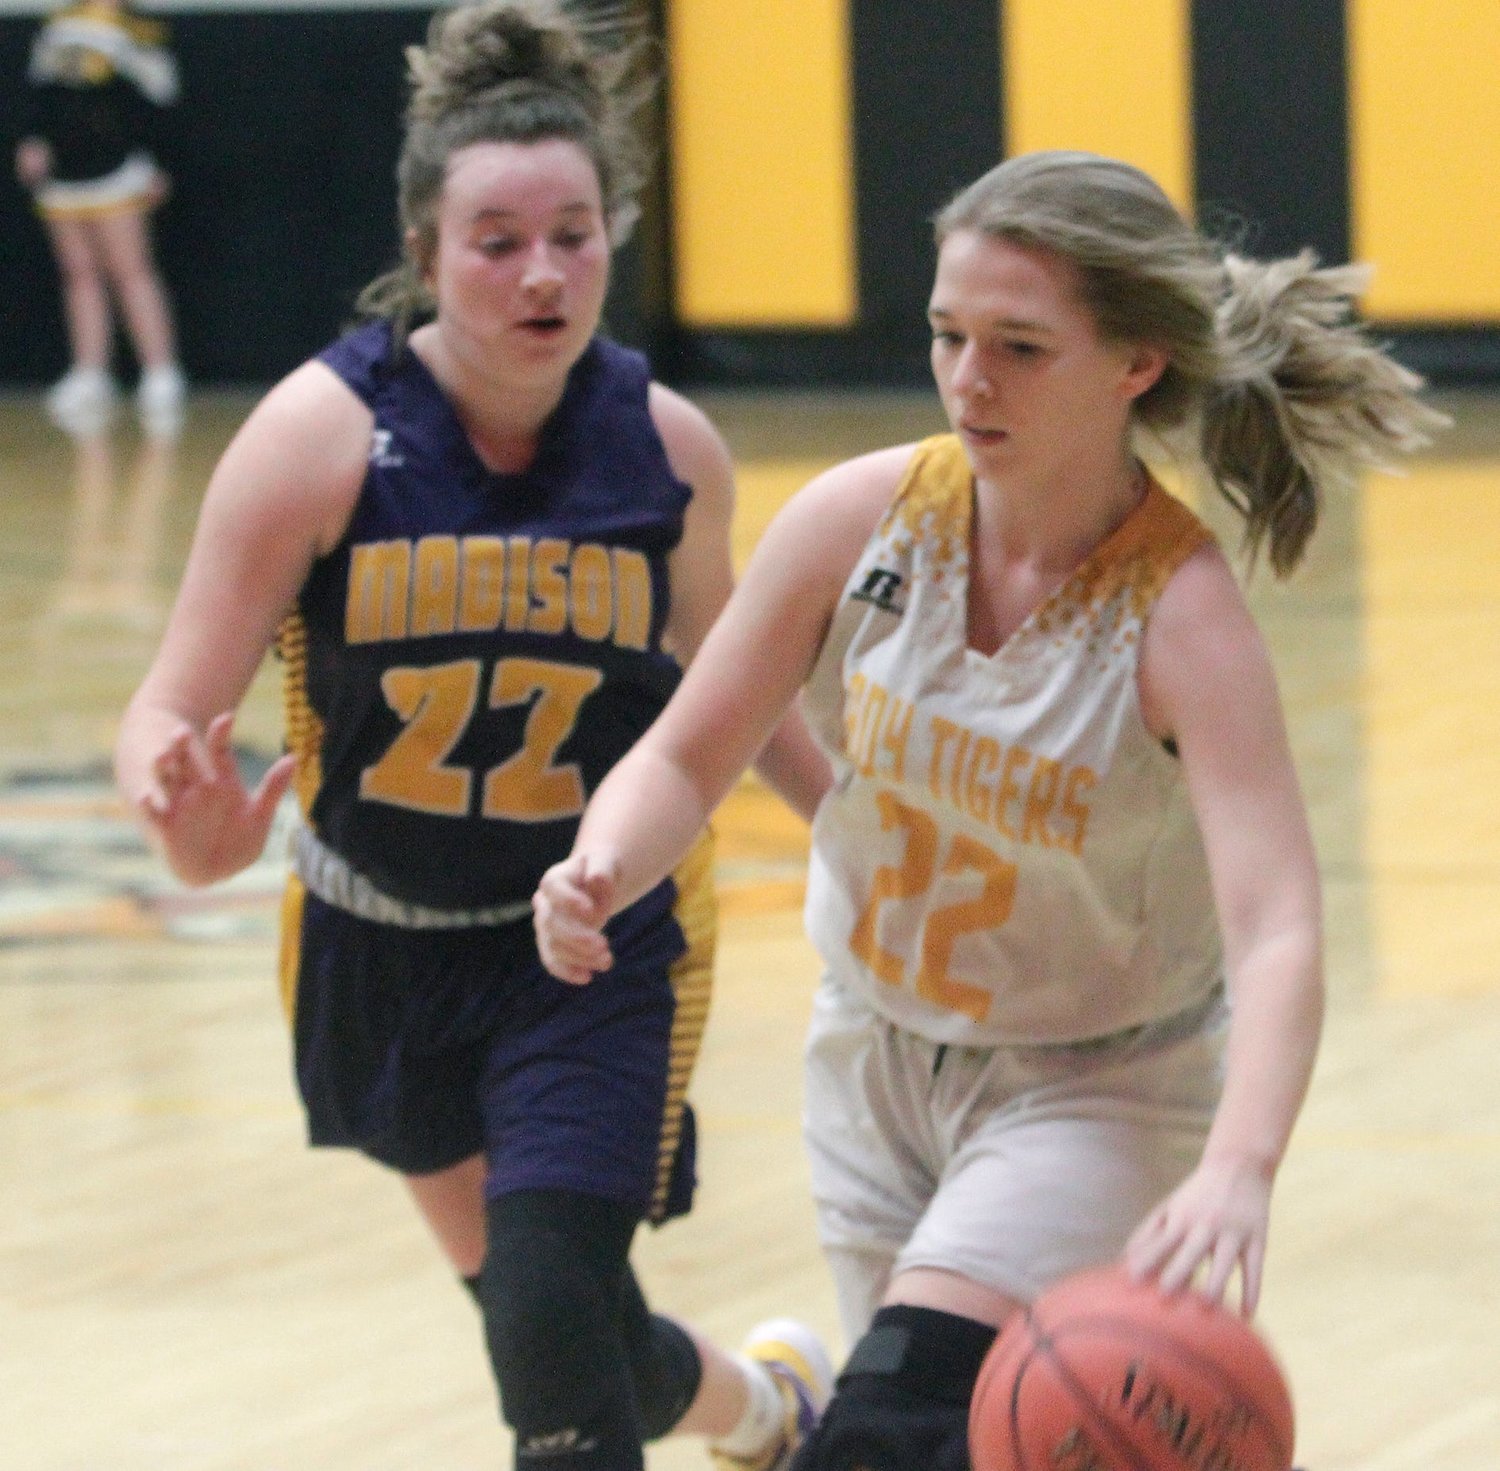 Higbee’s senior center Macey Whisenand returns after a 2020-21 season that saw her average 6.3 PPG.